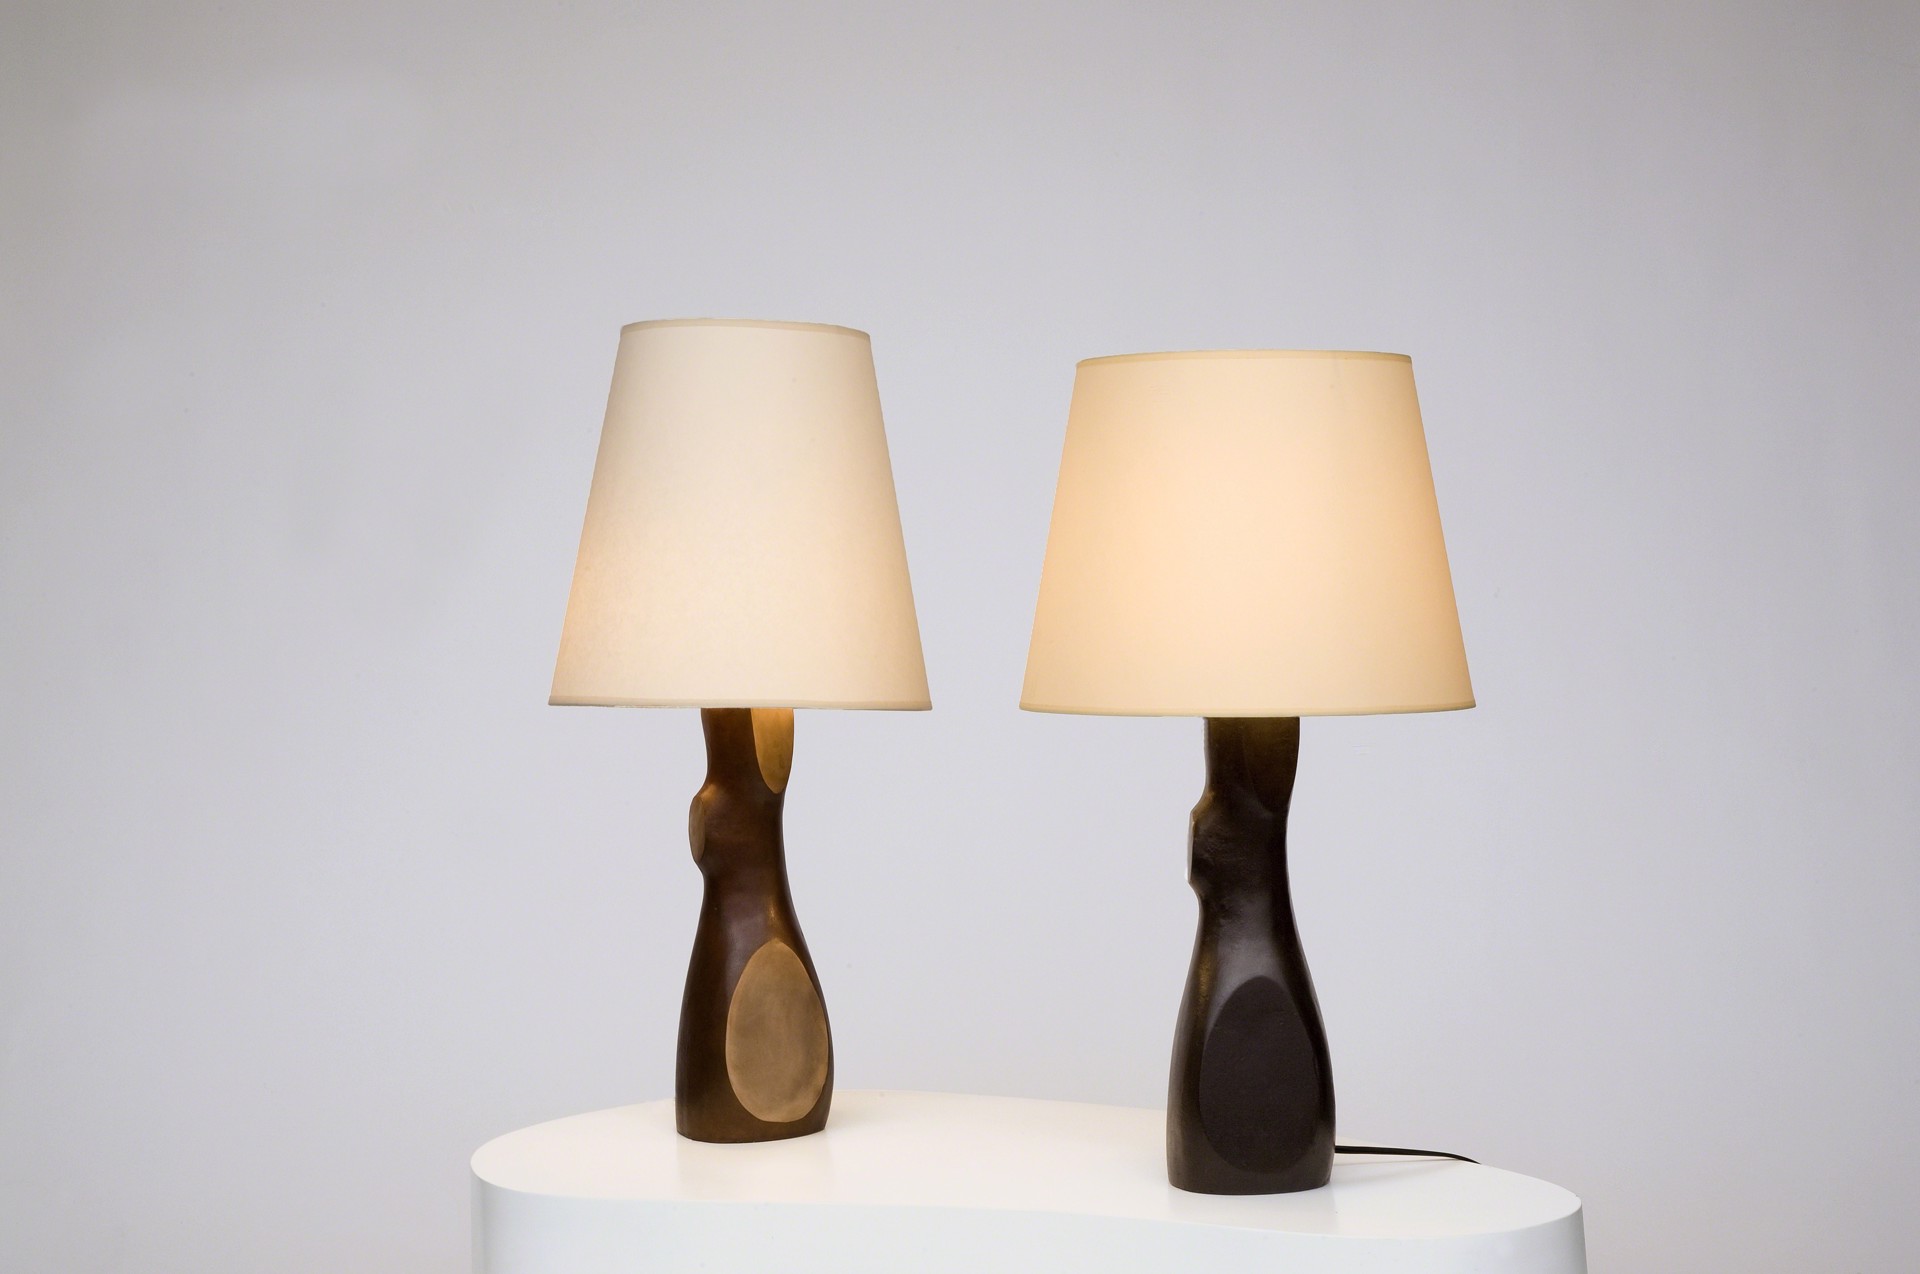 "Togo" Lamps by Jacques Jarrige